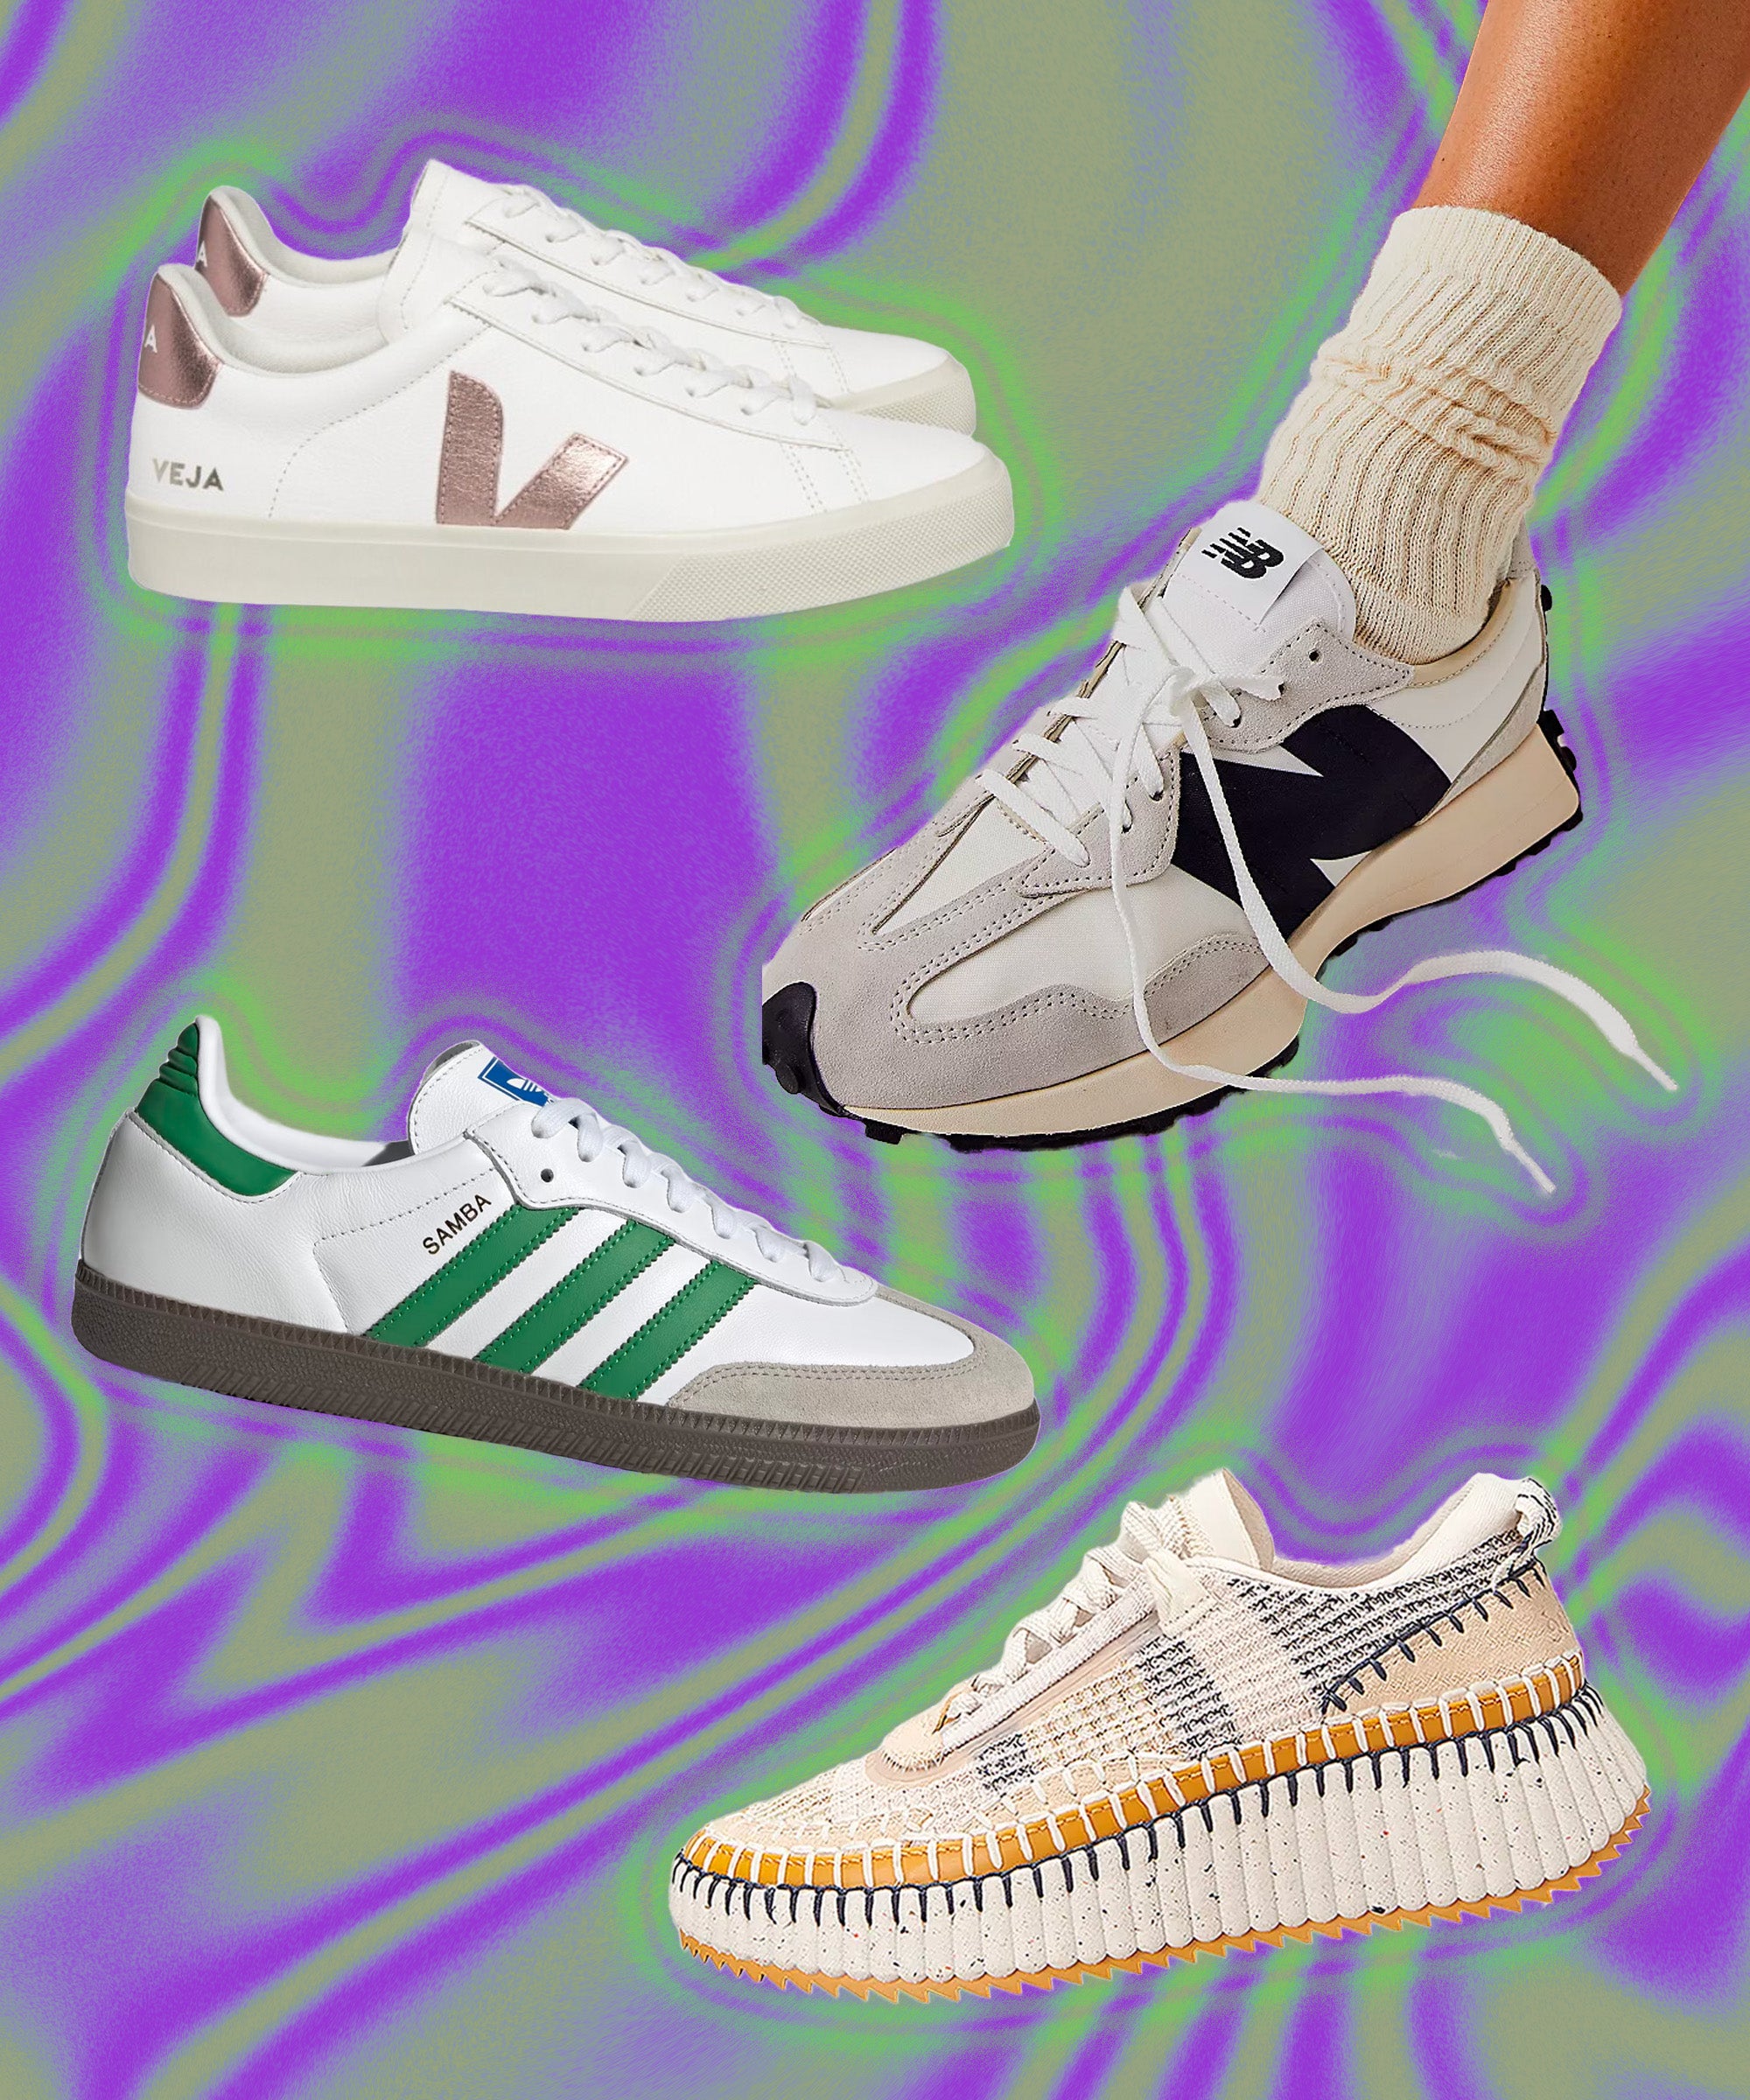 The Best Sneakers Of 2023: 5 Trends To Invest In - Vogue Australia